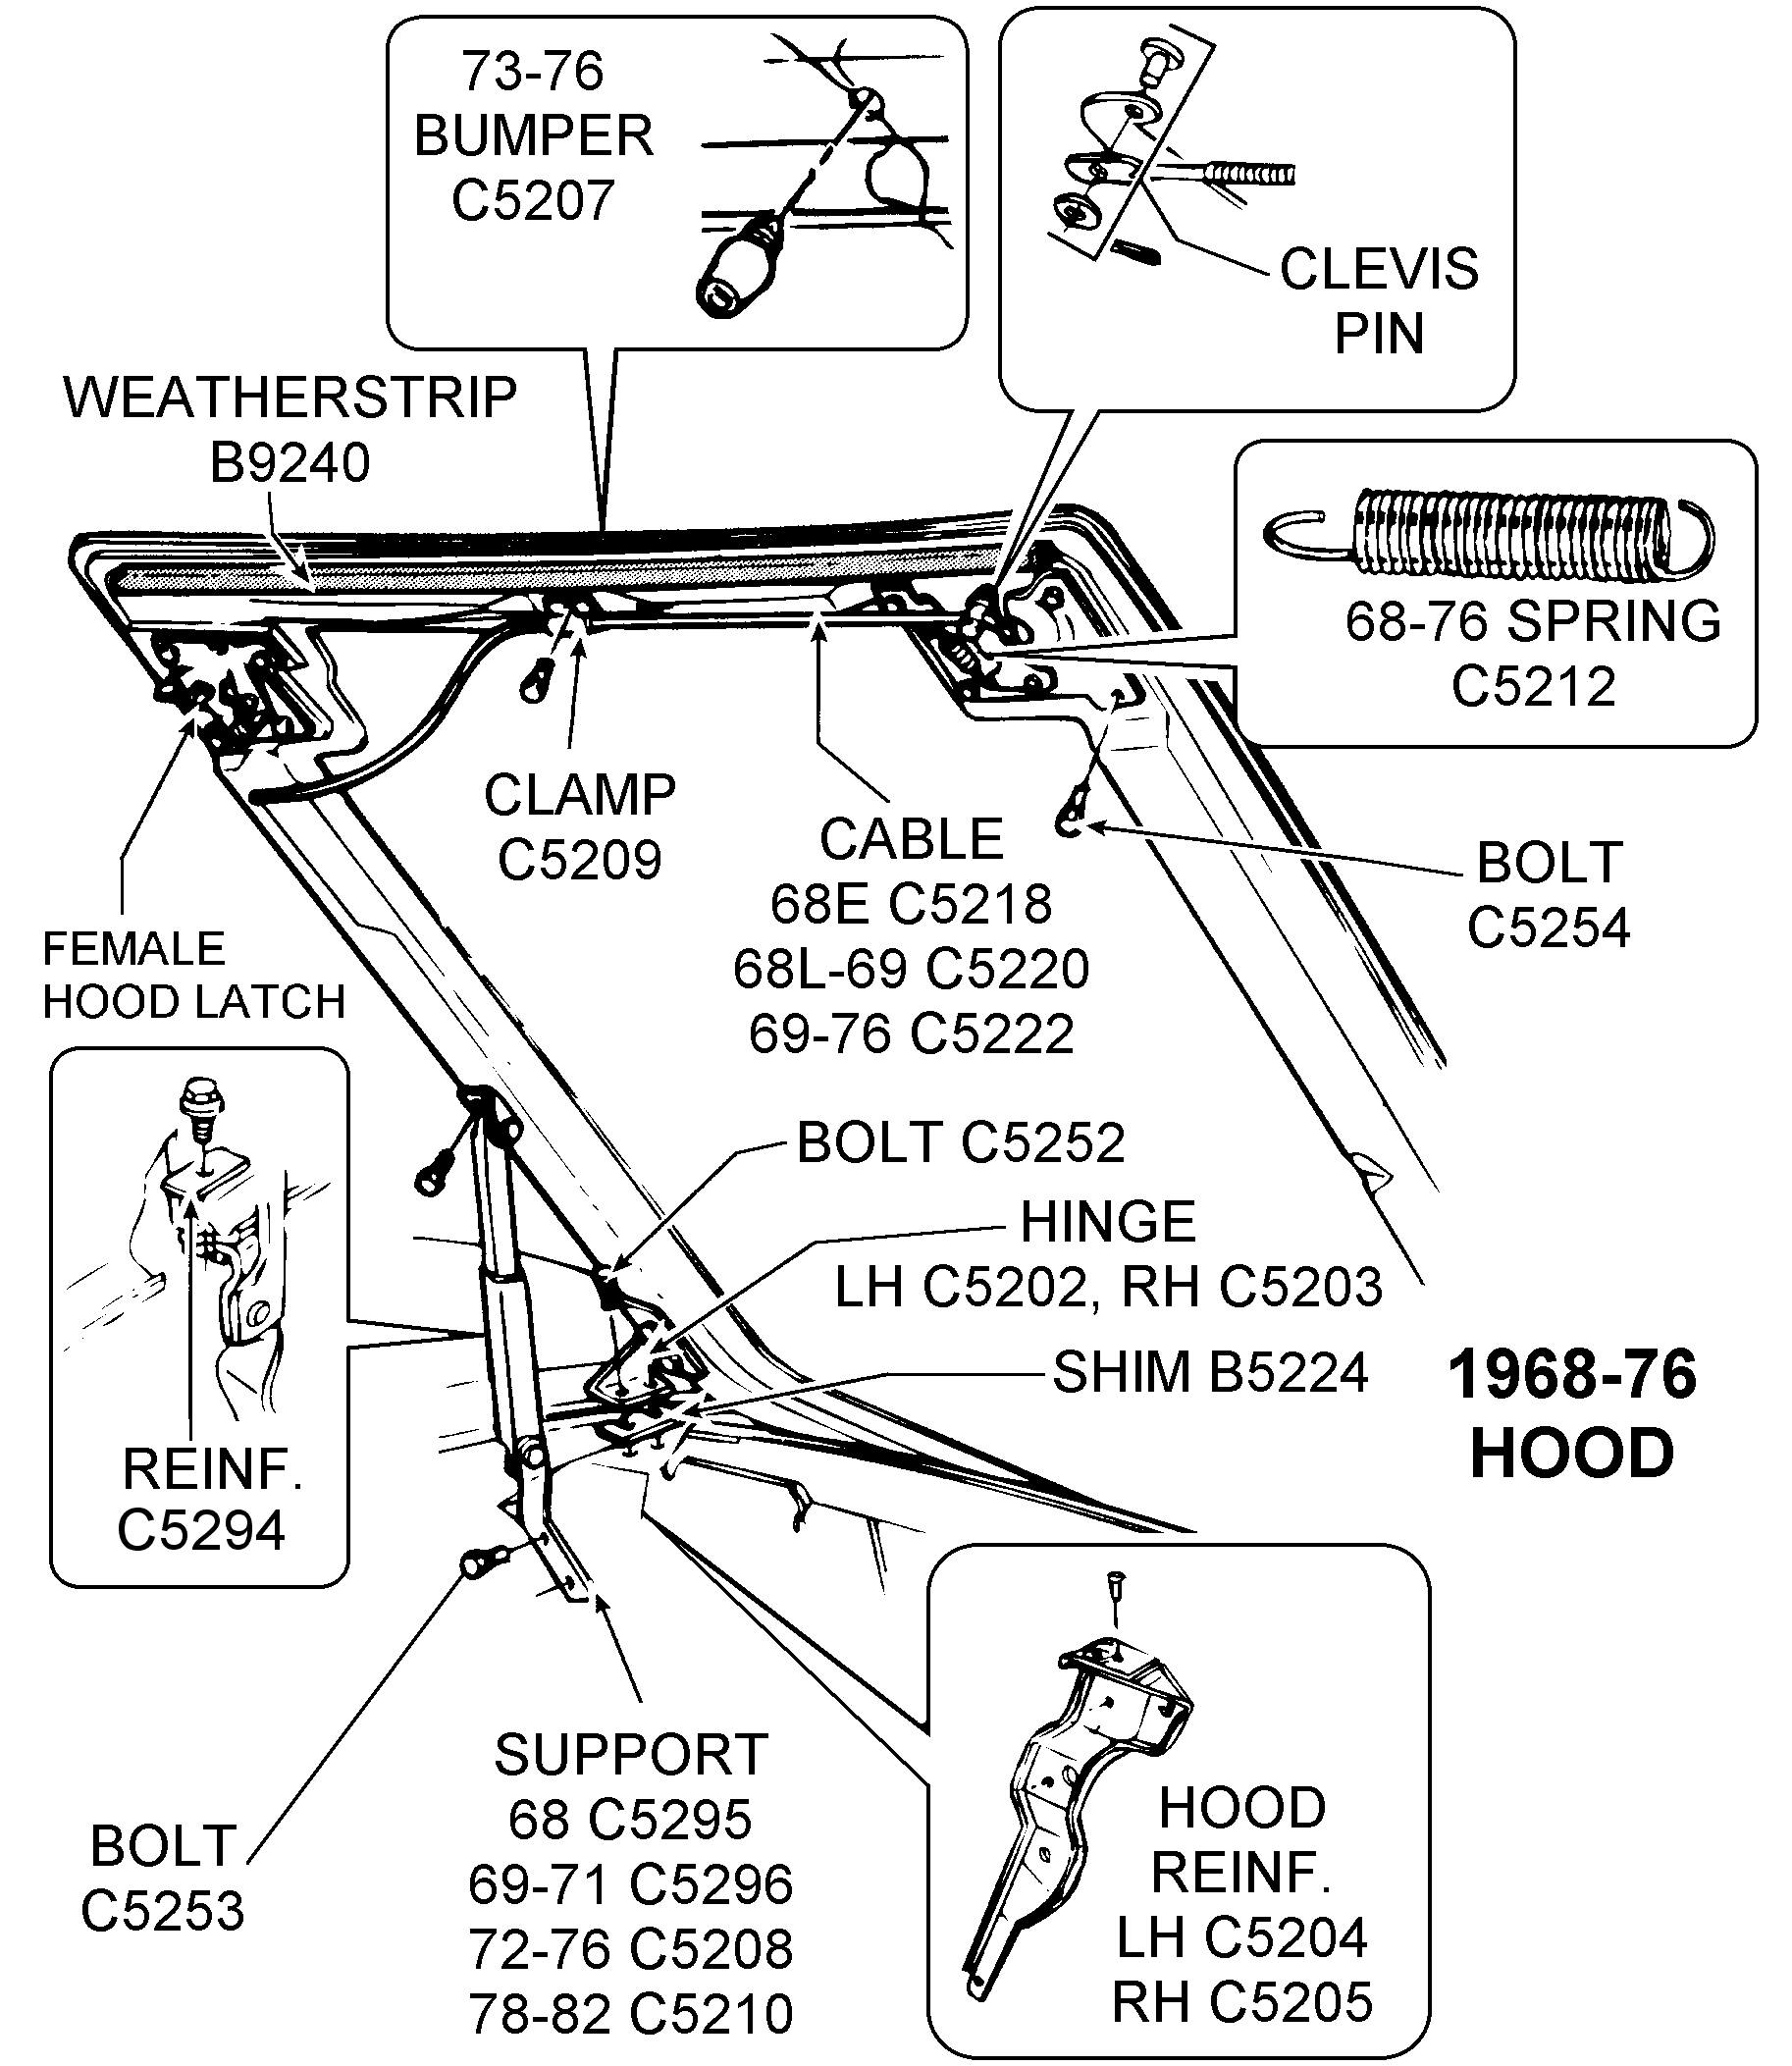 1968 76 Hood Assembly Diagram View Chicago Corvette Supply